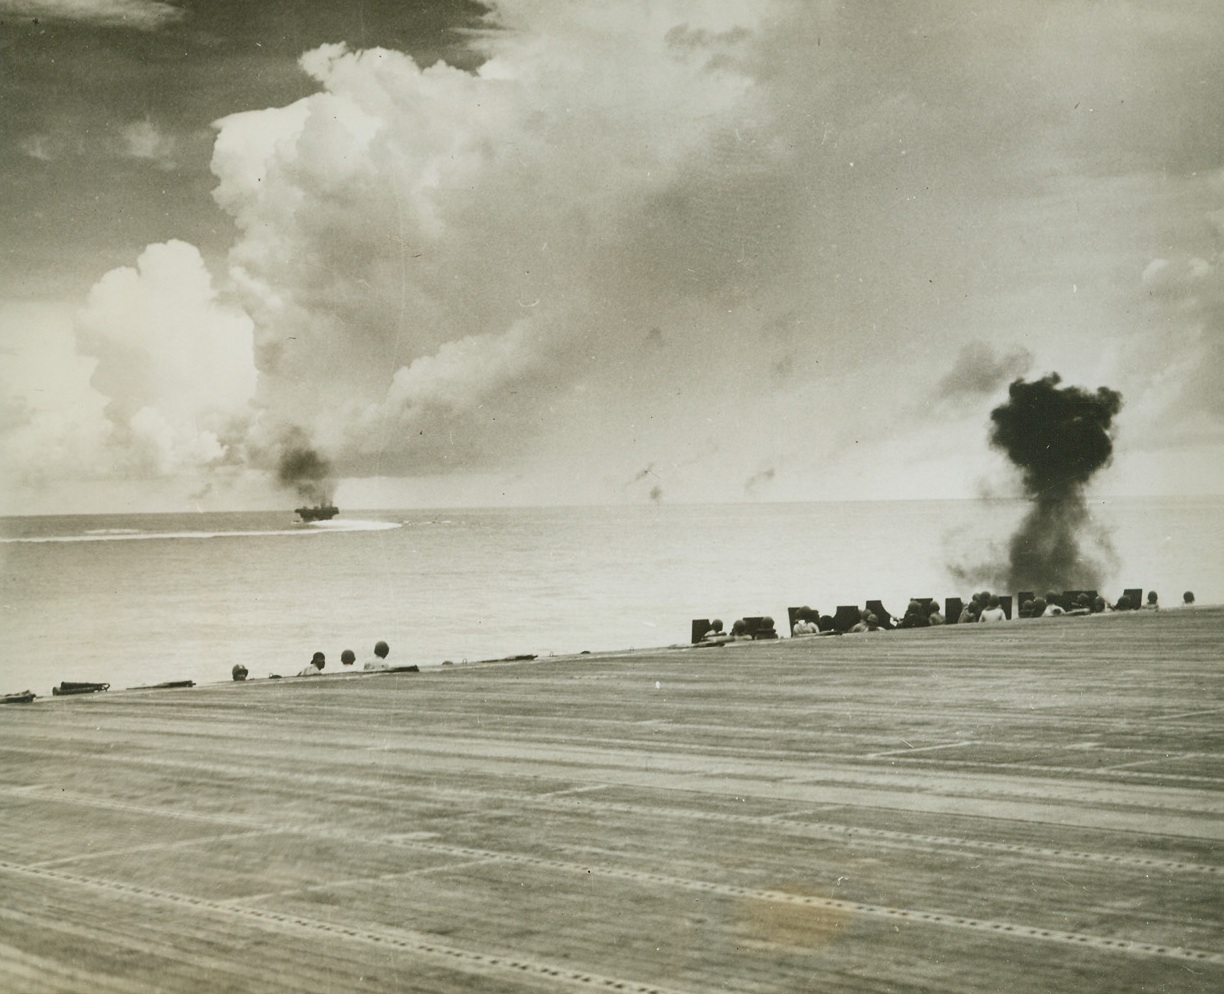 Bye, Bye, Zero, 1/18/1944. At Sea – One puff of thick black smoke marks the watery grave of a Jap zero, shot down along with 63 other enemy planes during a savage counter attack on the U.S. task force that raided Rabaul on November 11, 1943.  Destroying that great number of war birds, our carrier task force demonstrated its power – proving that outfits of this kind pack a tremendous wallop. Credit line (Official U.S. Navy photo from ACME);